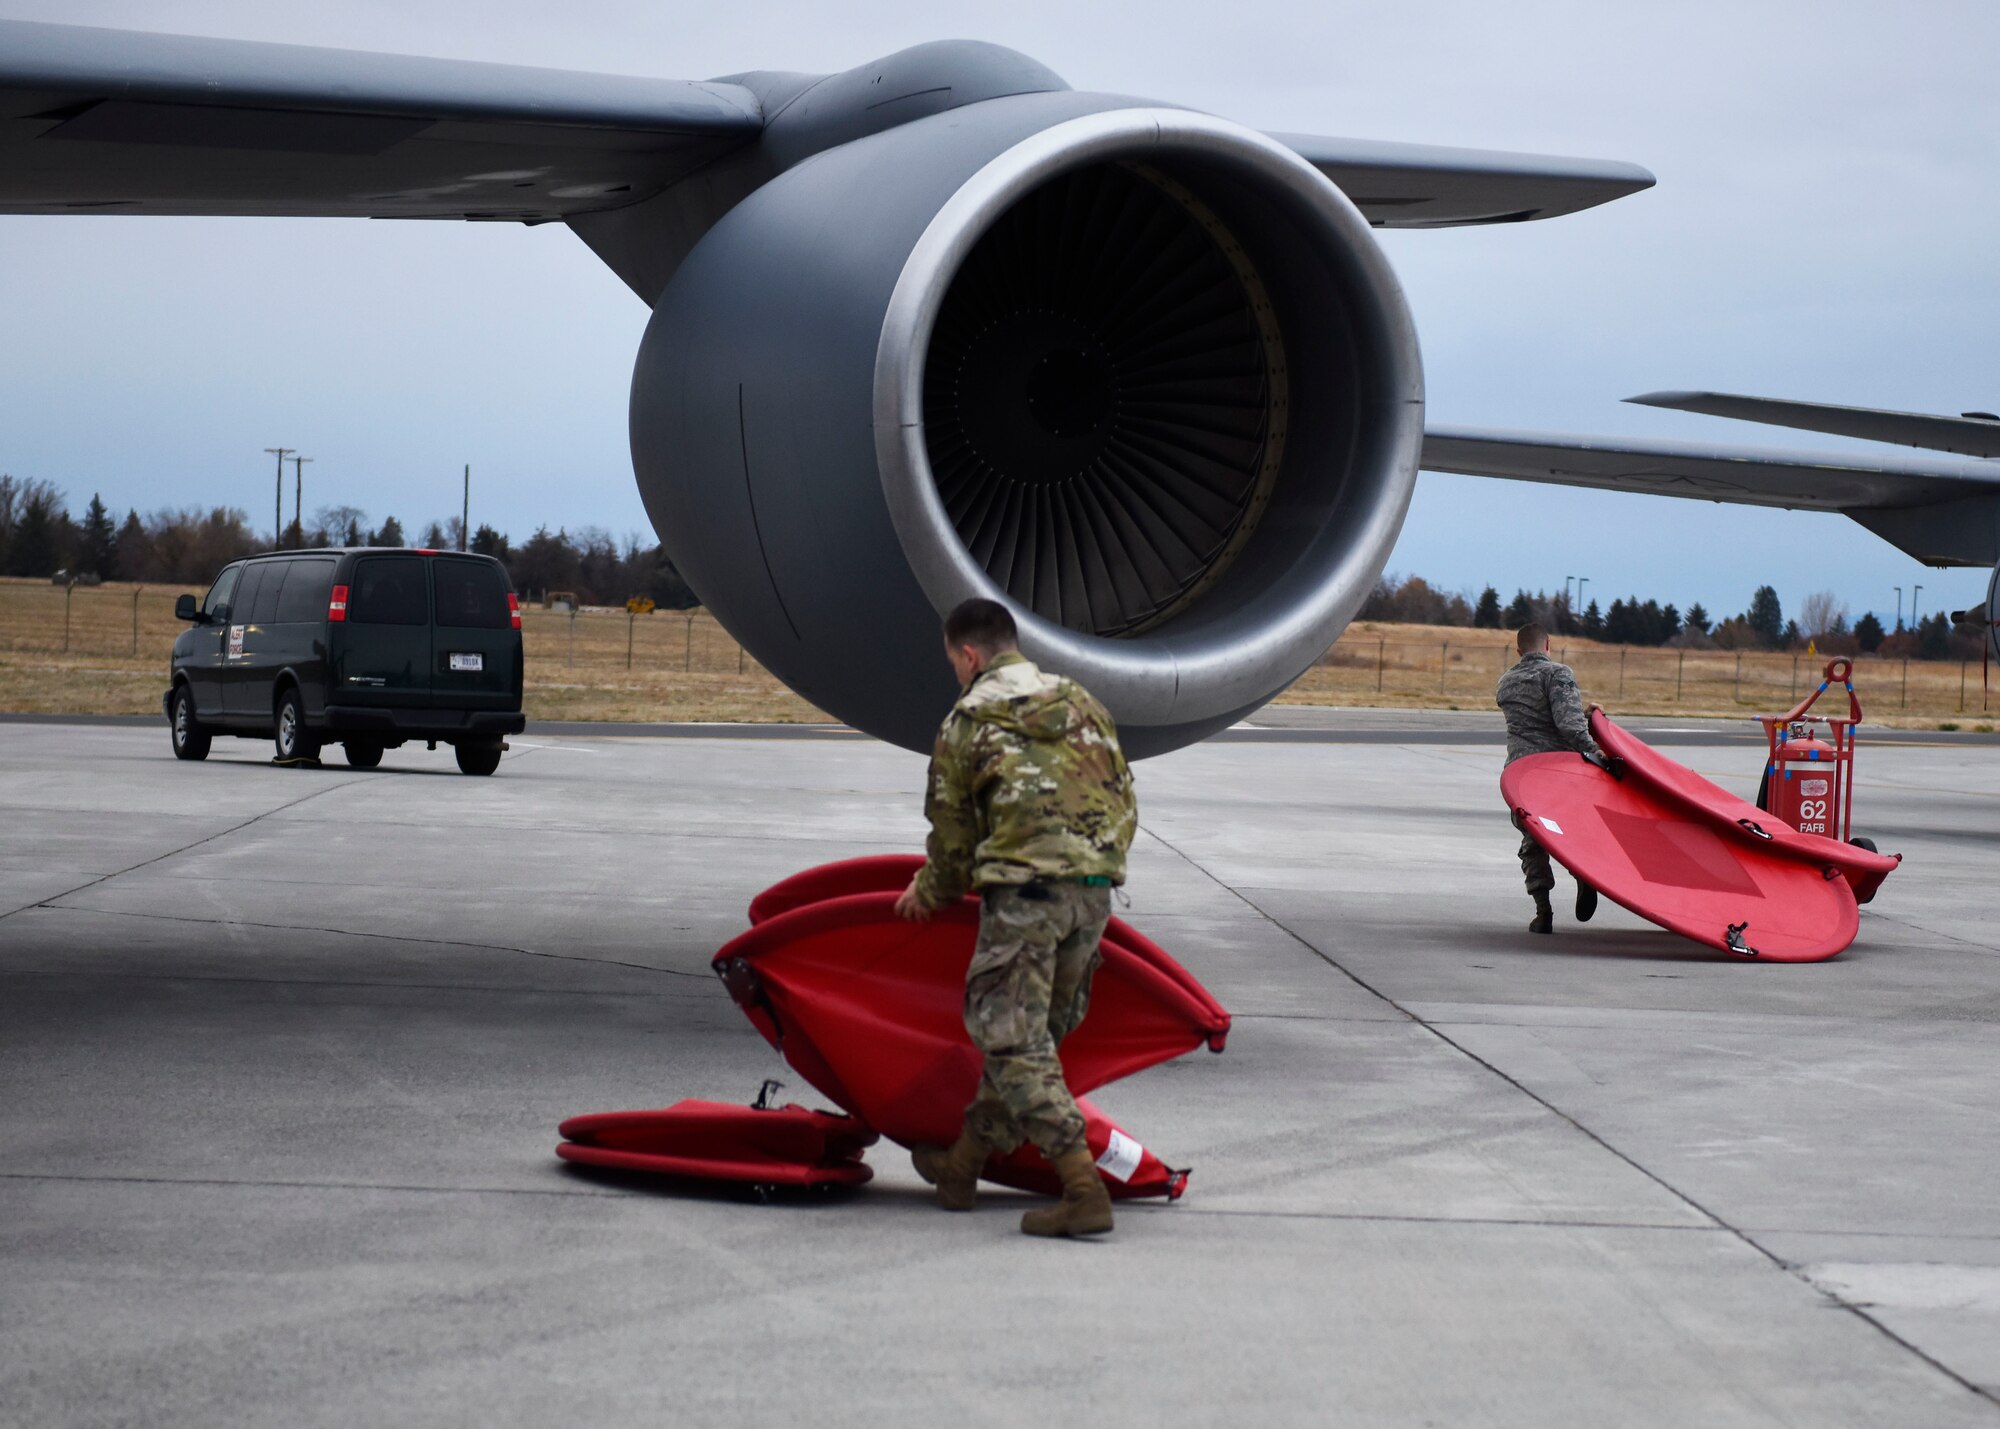 Staff Sgt. Austin Garcia and Senior Airman Dan O'Connor, 92nd Aircraft Maintenance Squadron crew chiefs, remove engine covers as part of an alert response during Exercise Global Thunder 2019 at Fairchild Staff Sgt. Austin Garcia and Senior Airman Dan O'Connor, 92nd Aircraft Maintenance Squadron crew chiefs, remove engine covers as part of an alert response during Exercise Global Thunder 2019 at Fairchild Air Force Base, Washington, November 2018. Global Thunder is a U.S. Strategic Command exercise designed to ensure an efficient mission response by testing Airmen's ability to execute command, control and operational procedures during simulated combat scenarios. (U.S. Air Force photo/Airman 1st Class Lawrence Sena)